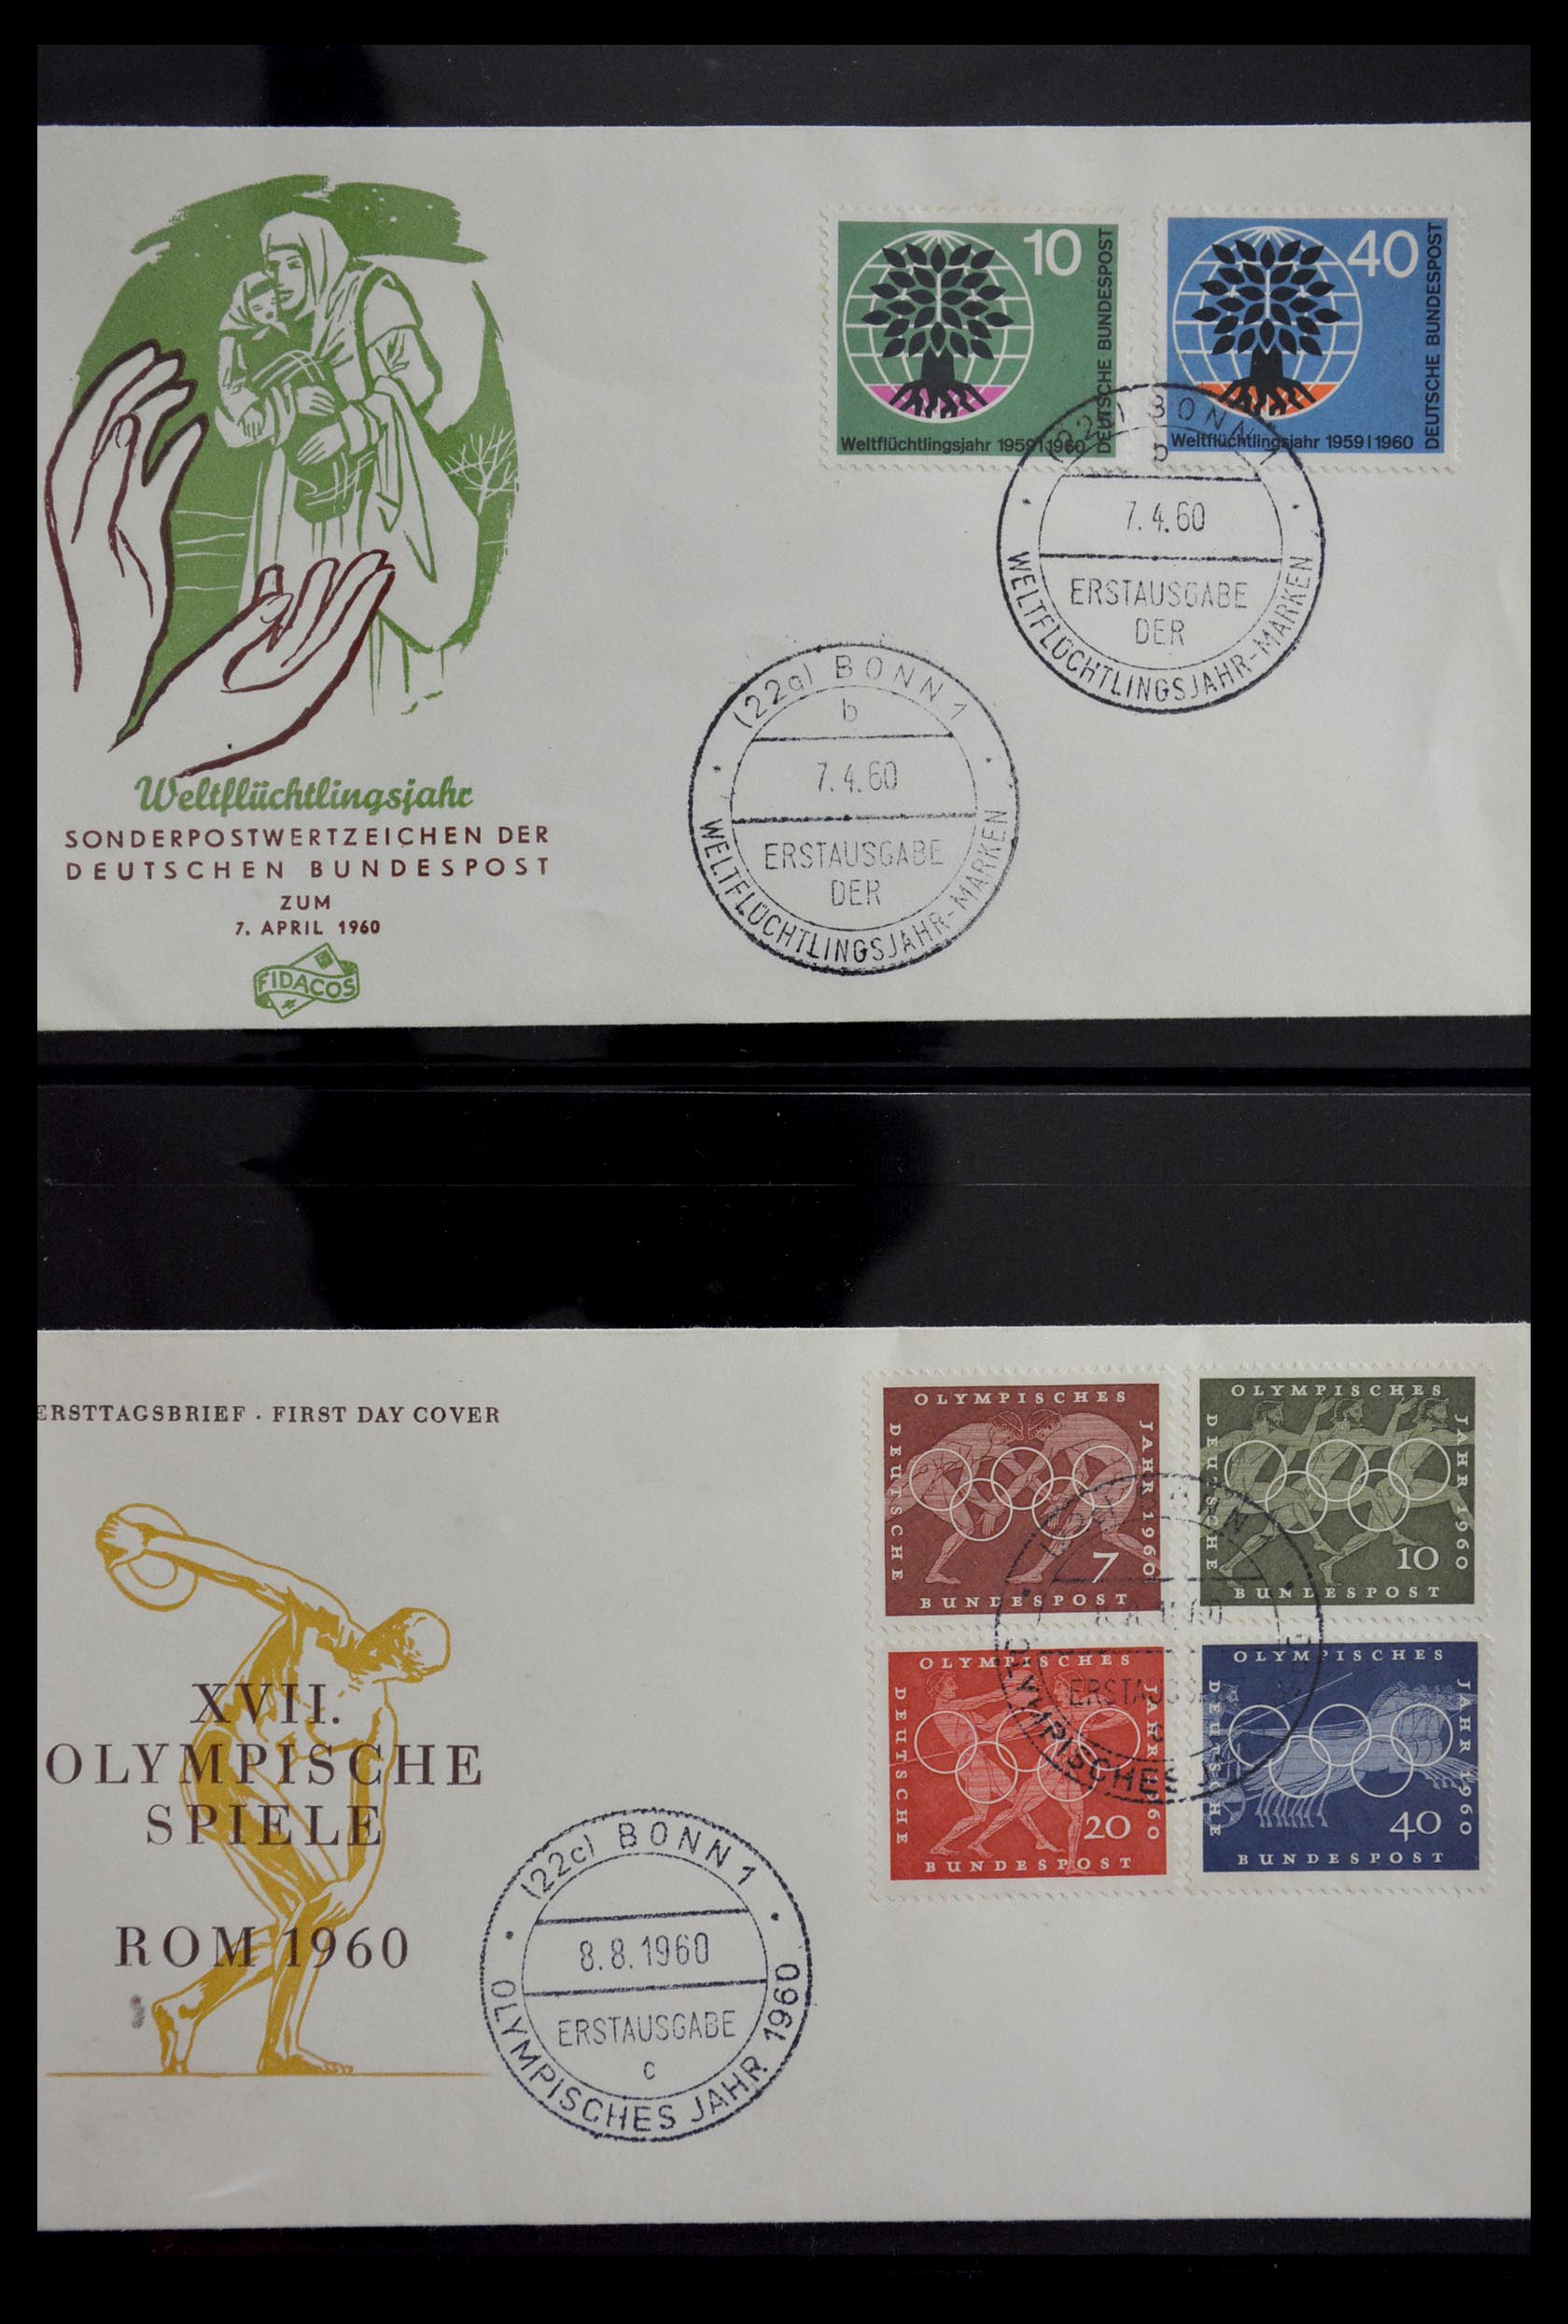 29382 019 - 29382 Germany covers and FDC's 1936-1965.